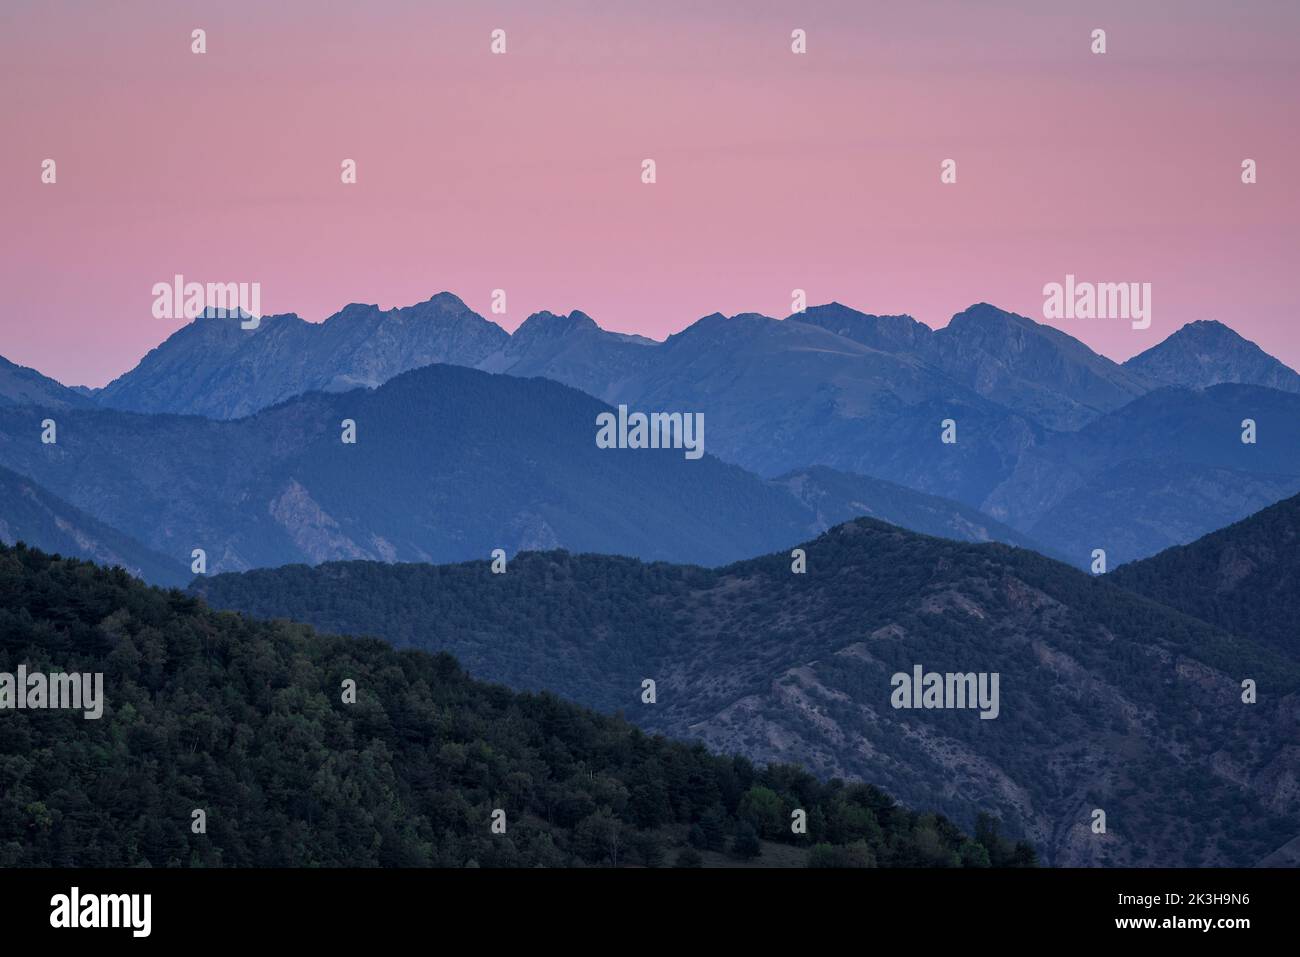 Sunrise over the mountains of the Aigüestortes i Estany de Sant Maurici National Park, seen from Alendo, in the Alt Pirineu natural park (Pyrenees) Stock Photo